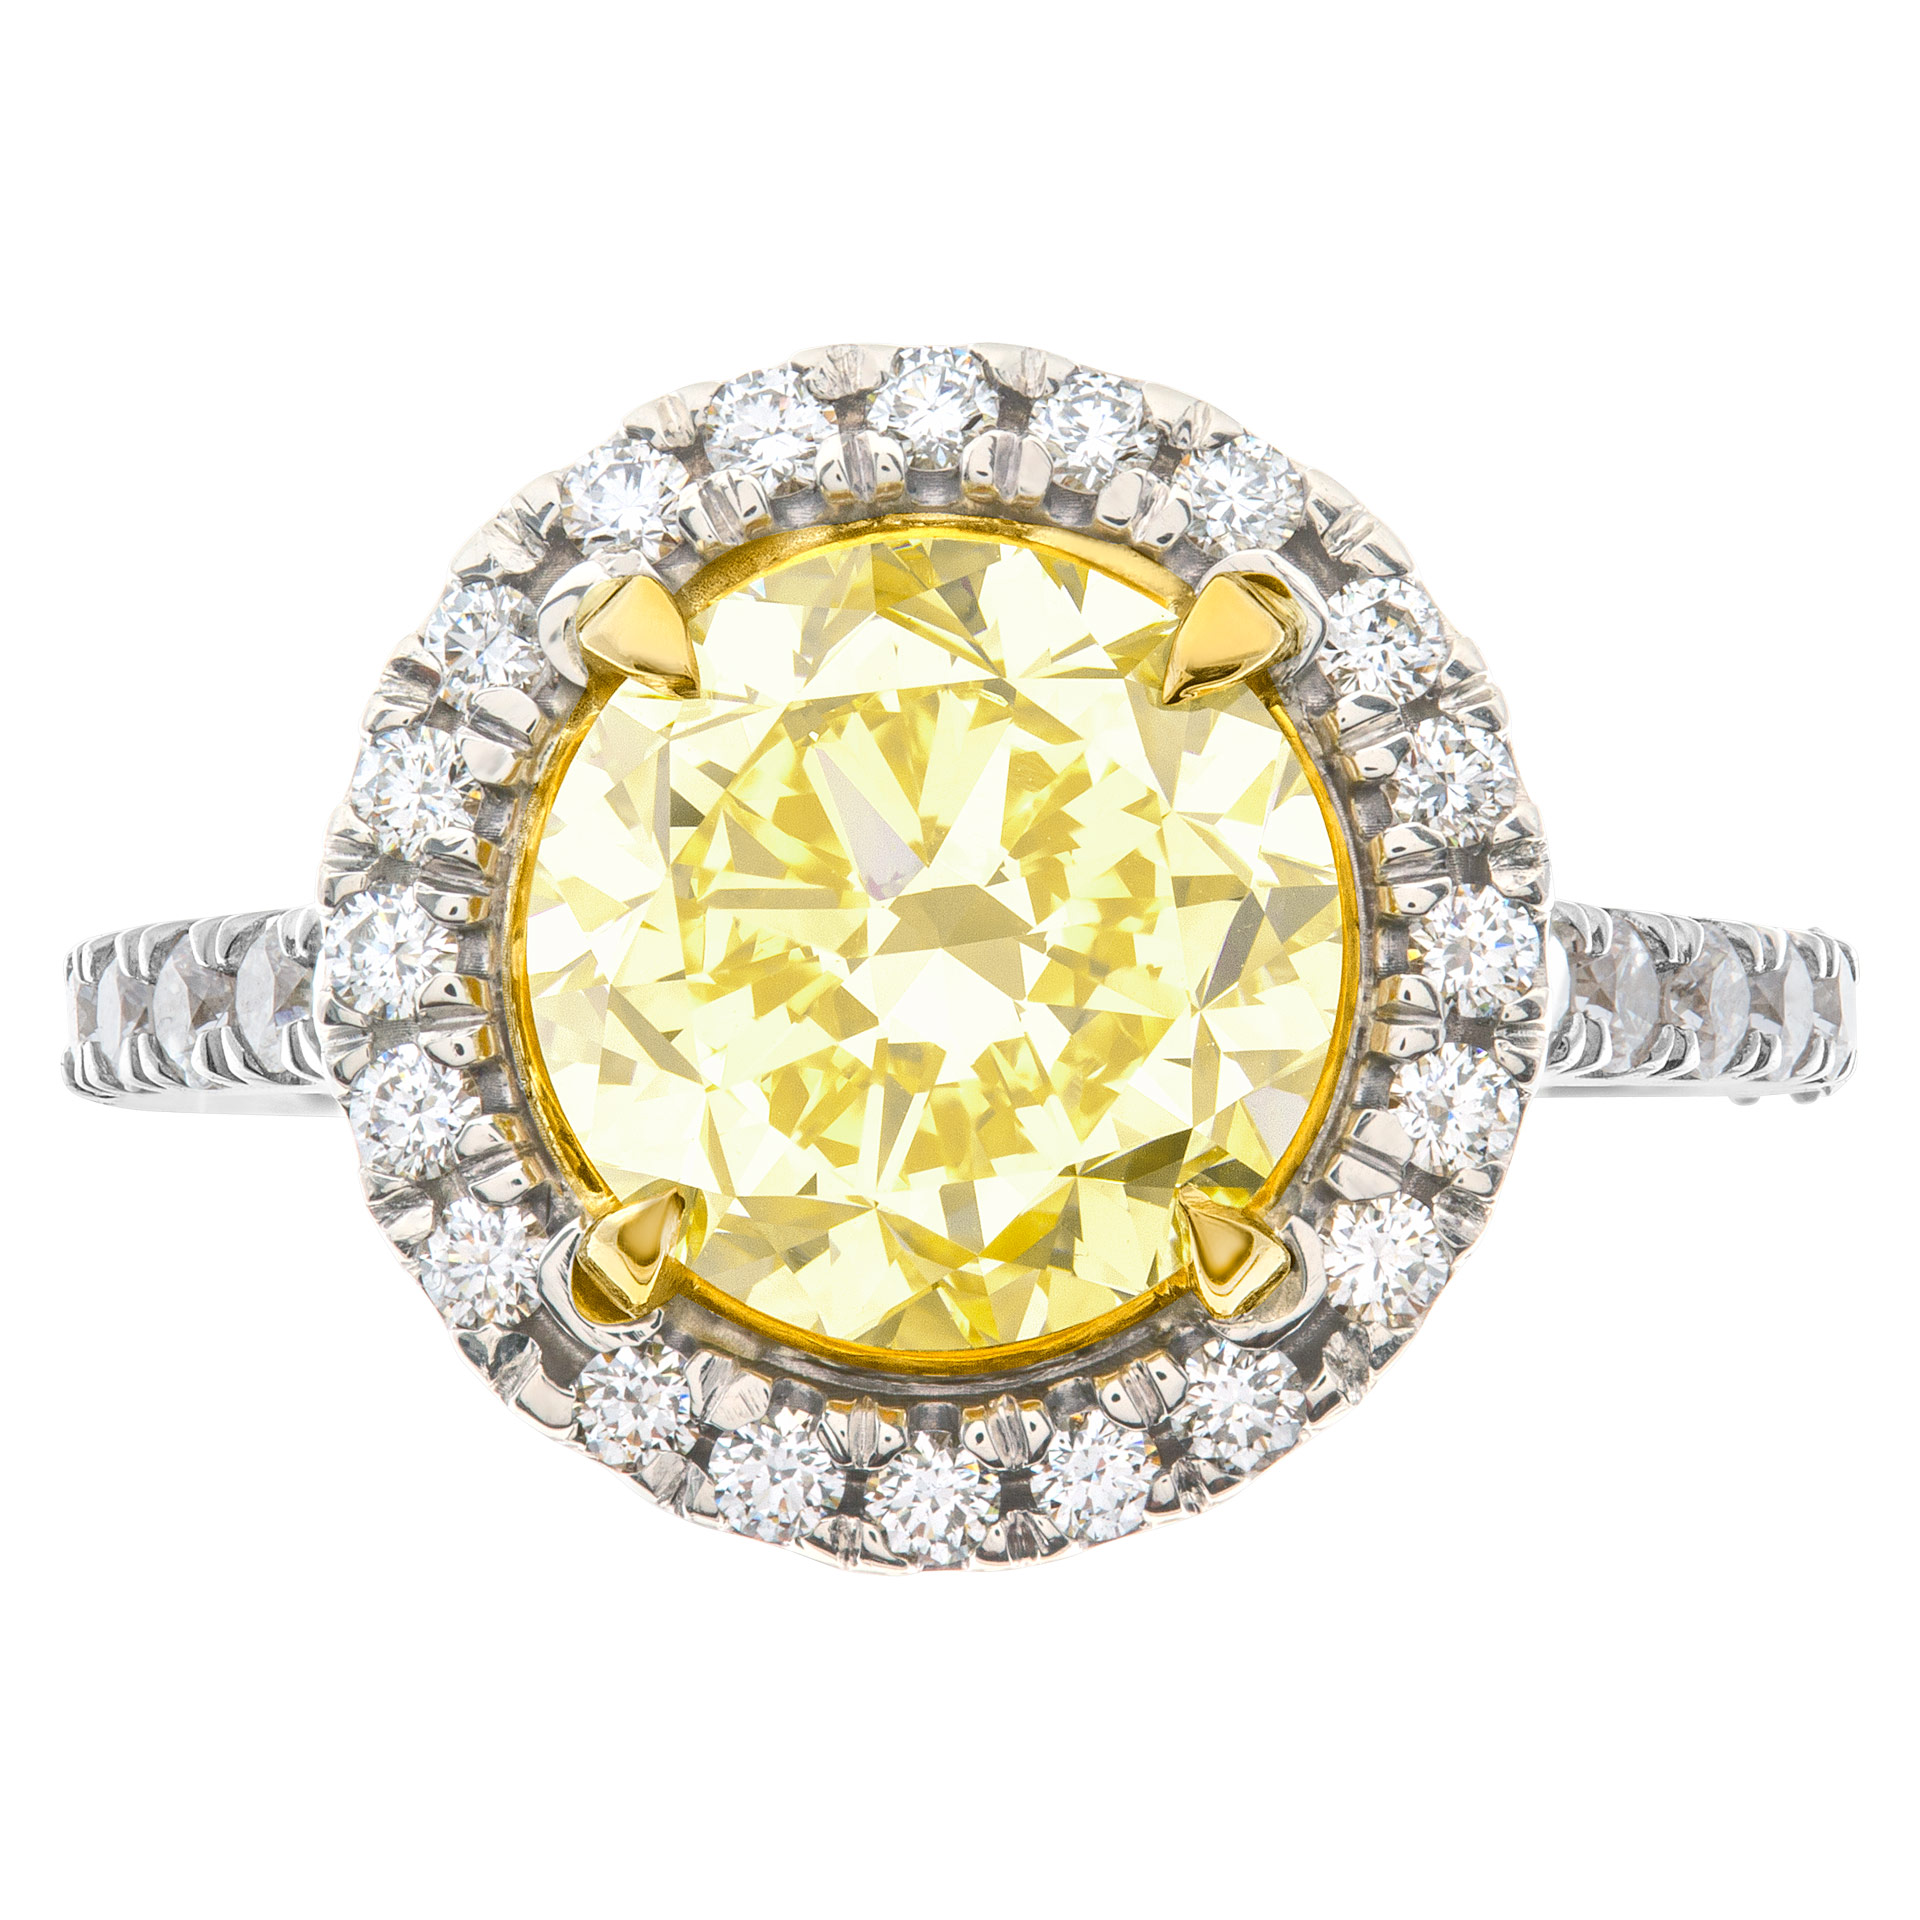 GIA certified round brilliant cut 3.13 carat (Natural, Fancy Intense Yellow, Even color, VVS1 clarity, Excellent symmetry) ring